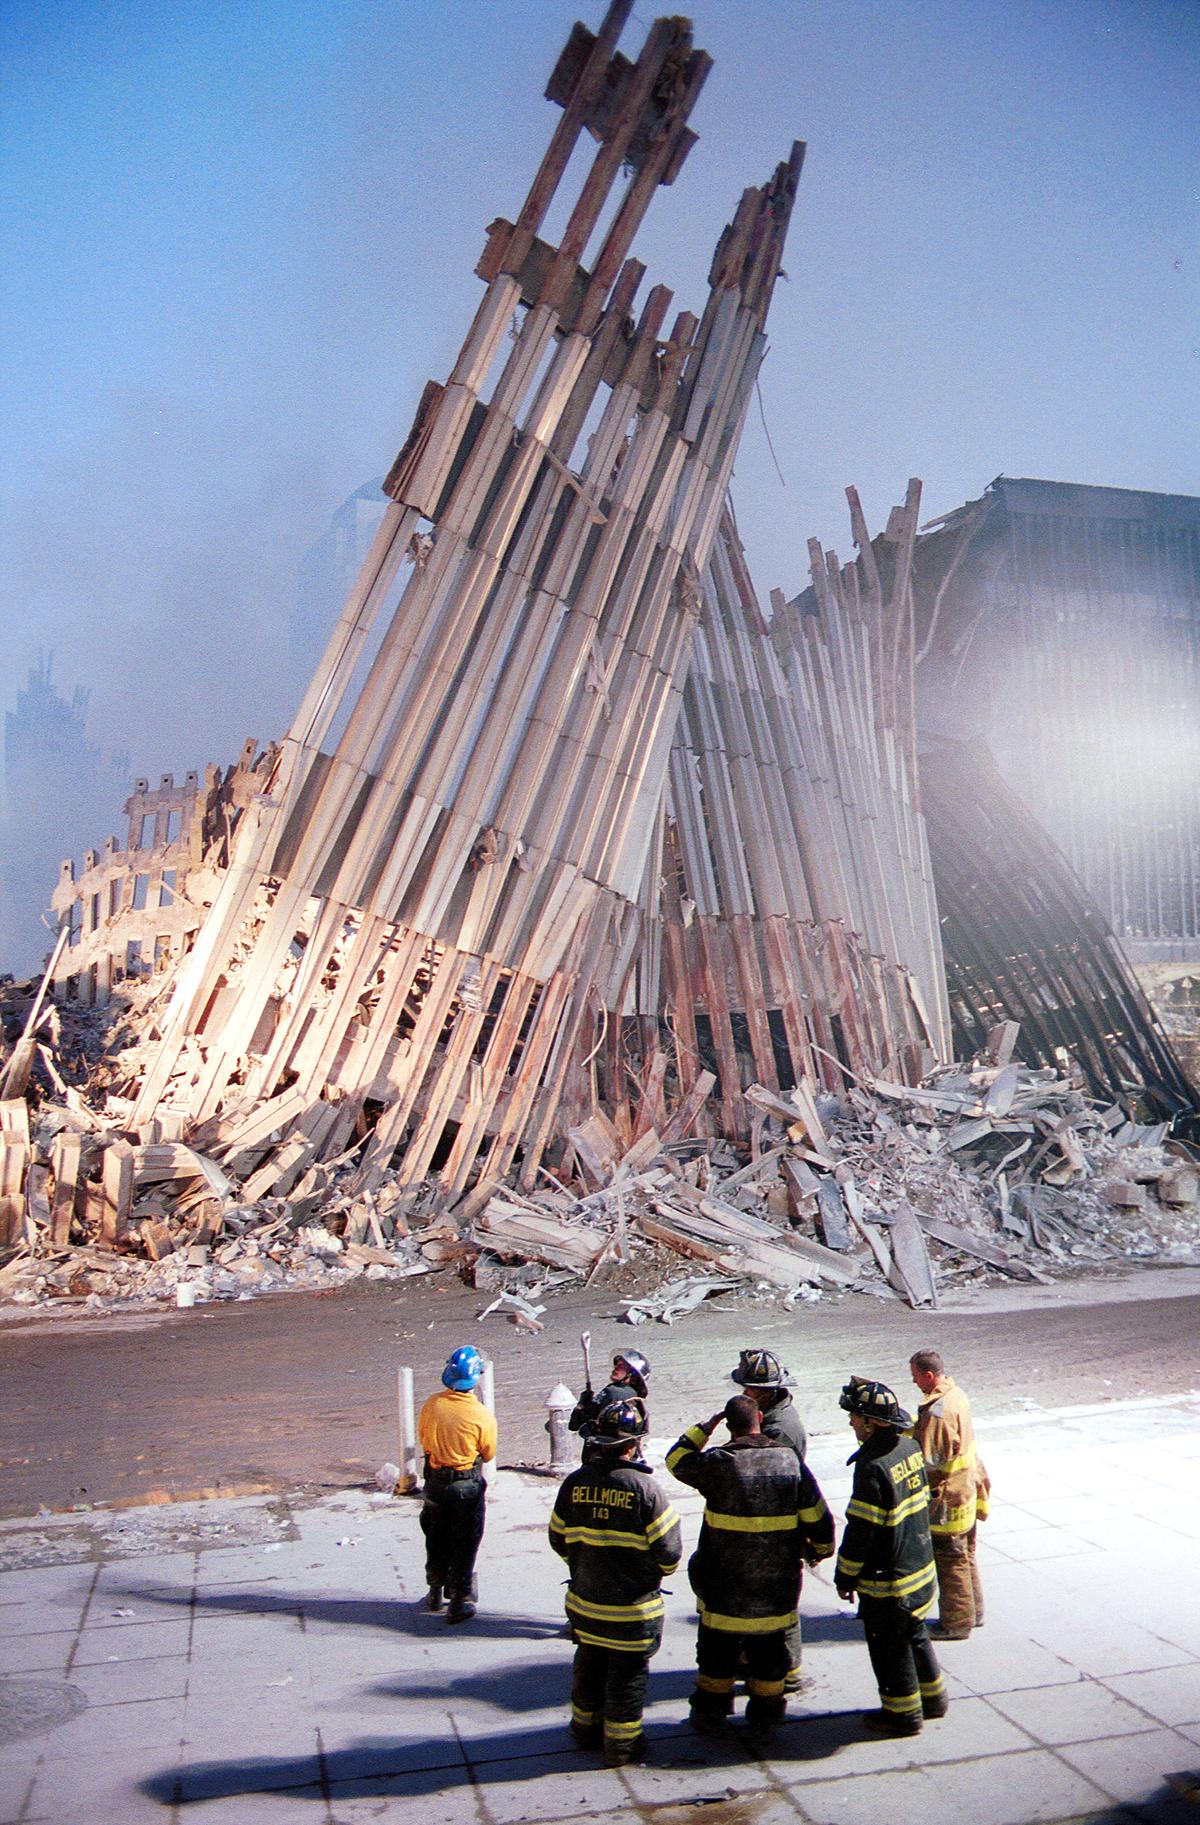 New York City firefighters look at the destroyed facade of the World Trade Center Sept. 13, 2001, two days after the twin towers were destroyed when hit by two hijacked passenger jets in a terrorist attack. (Chris Hondros/Getty Images)